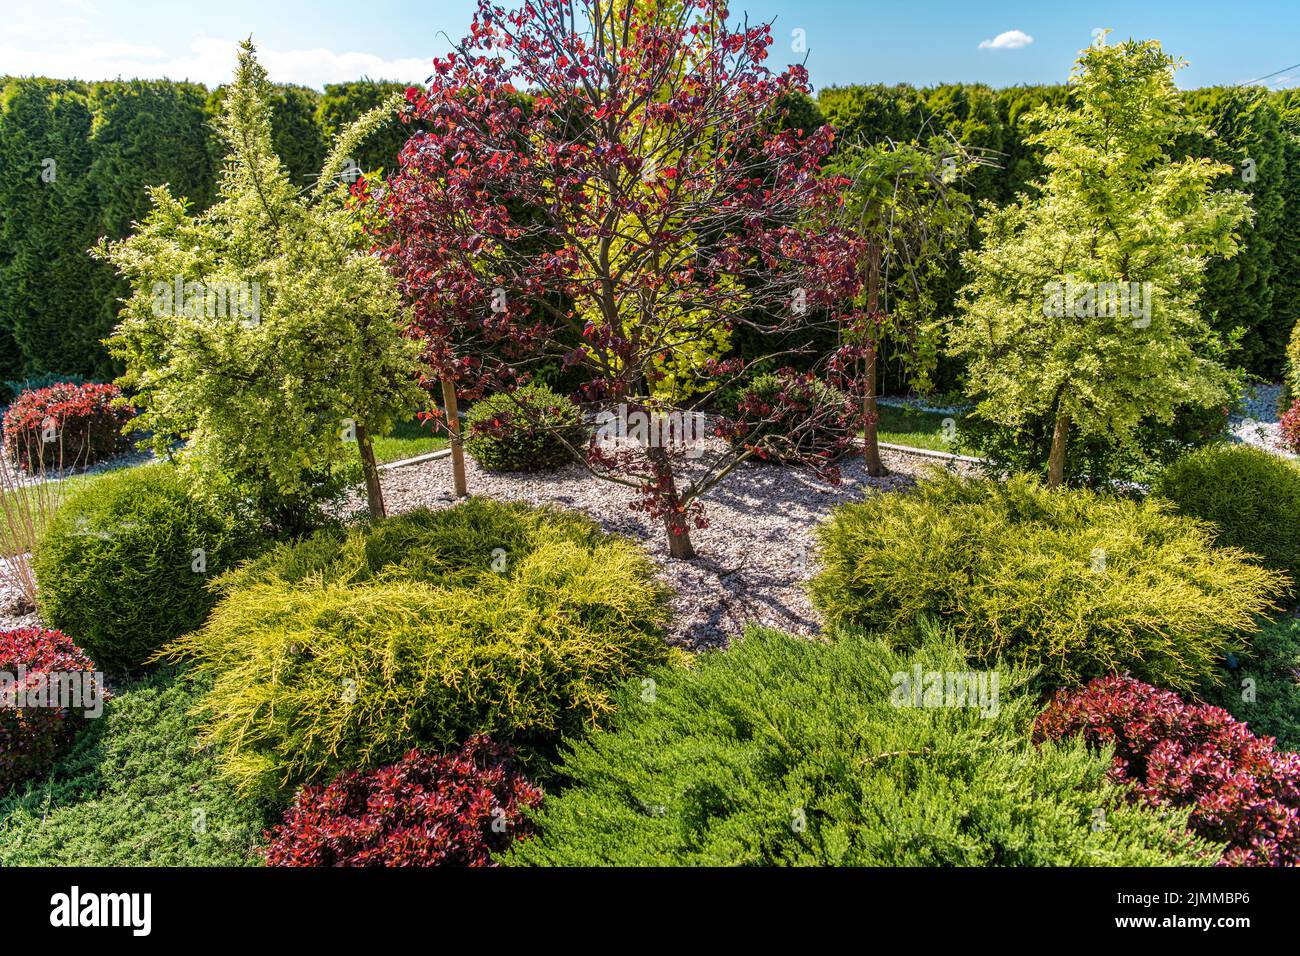 Aerial View of Beautifully Landscaped Garden with Variety of Plants. Large Red Maple Tree in the Middle Surrounded by Thujas, Hornbeam Trees and All K Stock Photo